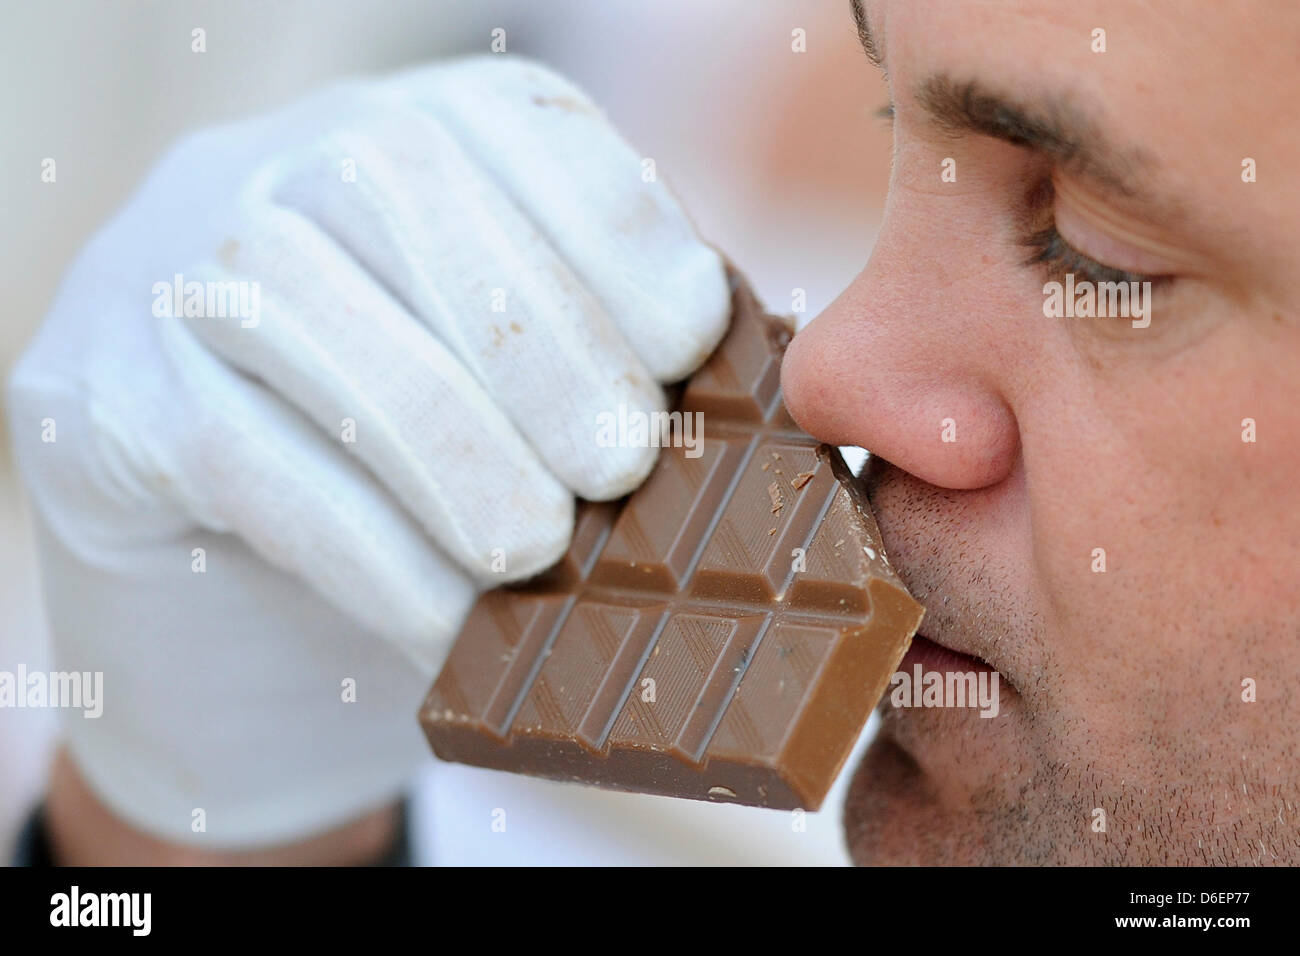 Expert Marc-Andre Loske smells a bar of chocolate at the Central College of the German Confectionery Industry (ZDS) in Solingen, Germany, 08 February 2012. The Food Test Center of the DLG (German Agricultural Association) tests more than 1000 differents candies for four days. The experts assess looks, flavor, texture, rheologic qualities and the melting process amongst others. Phot Stock Photo